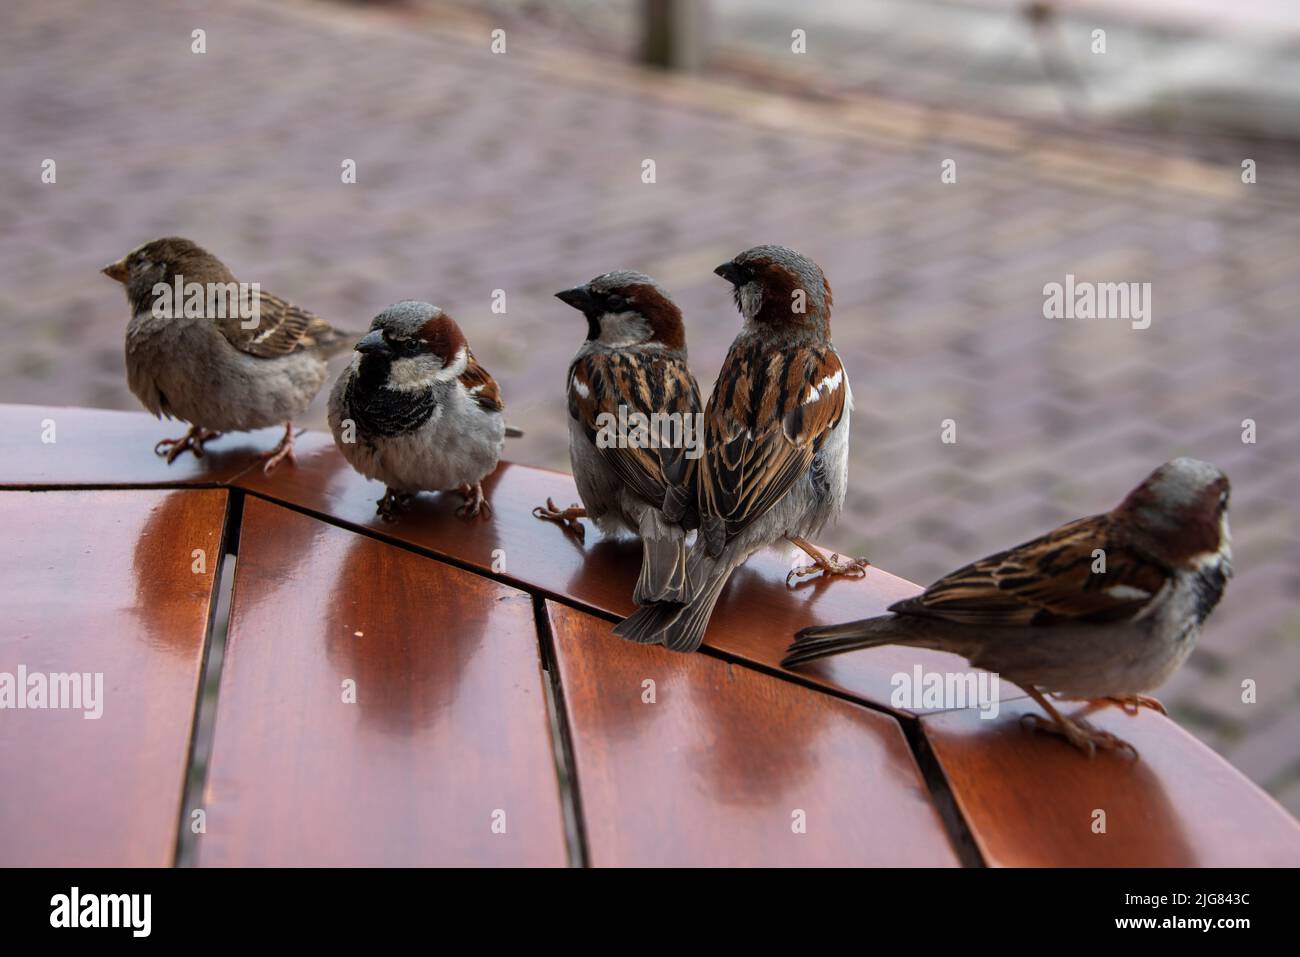 Several sparrows sit on a table and beg for food. Stock Photo